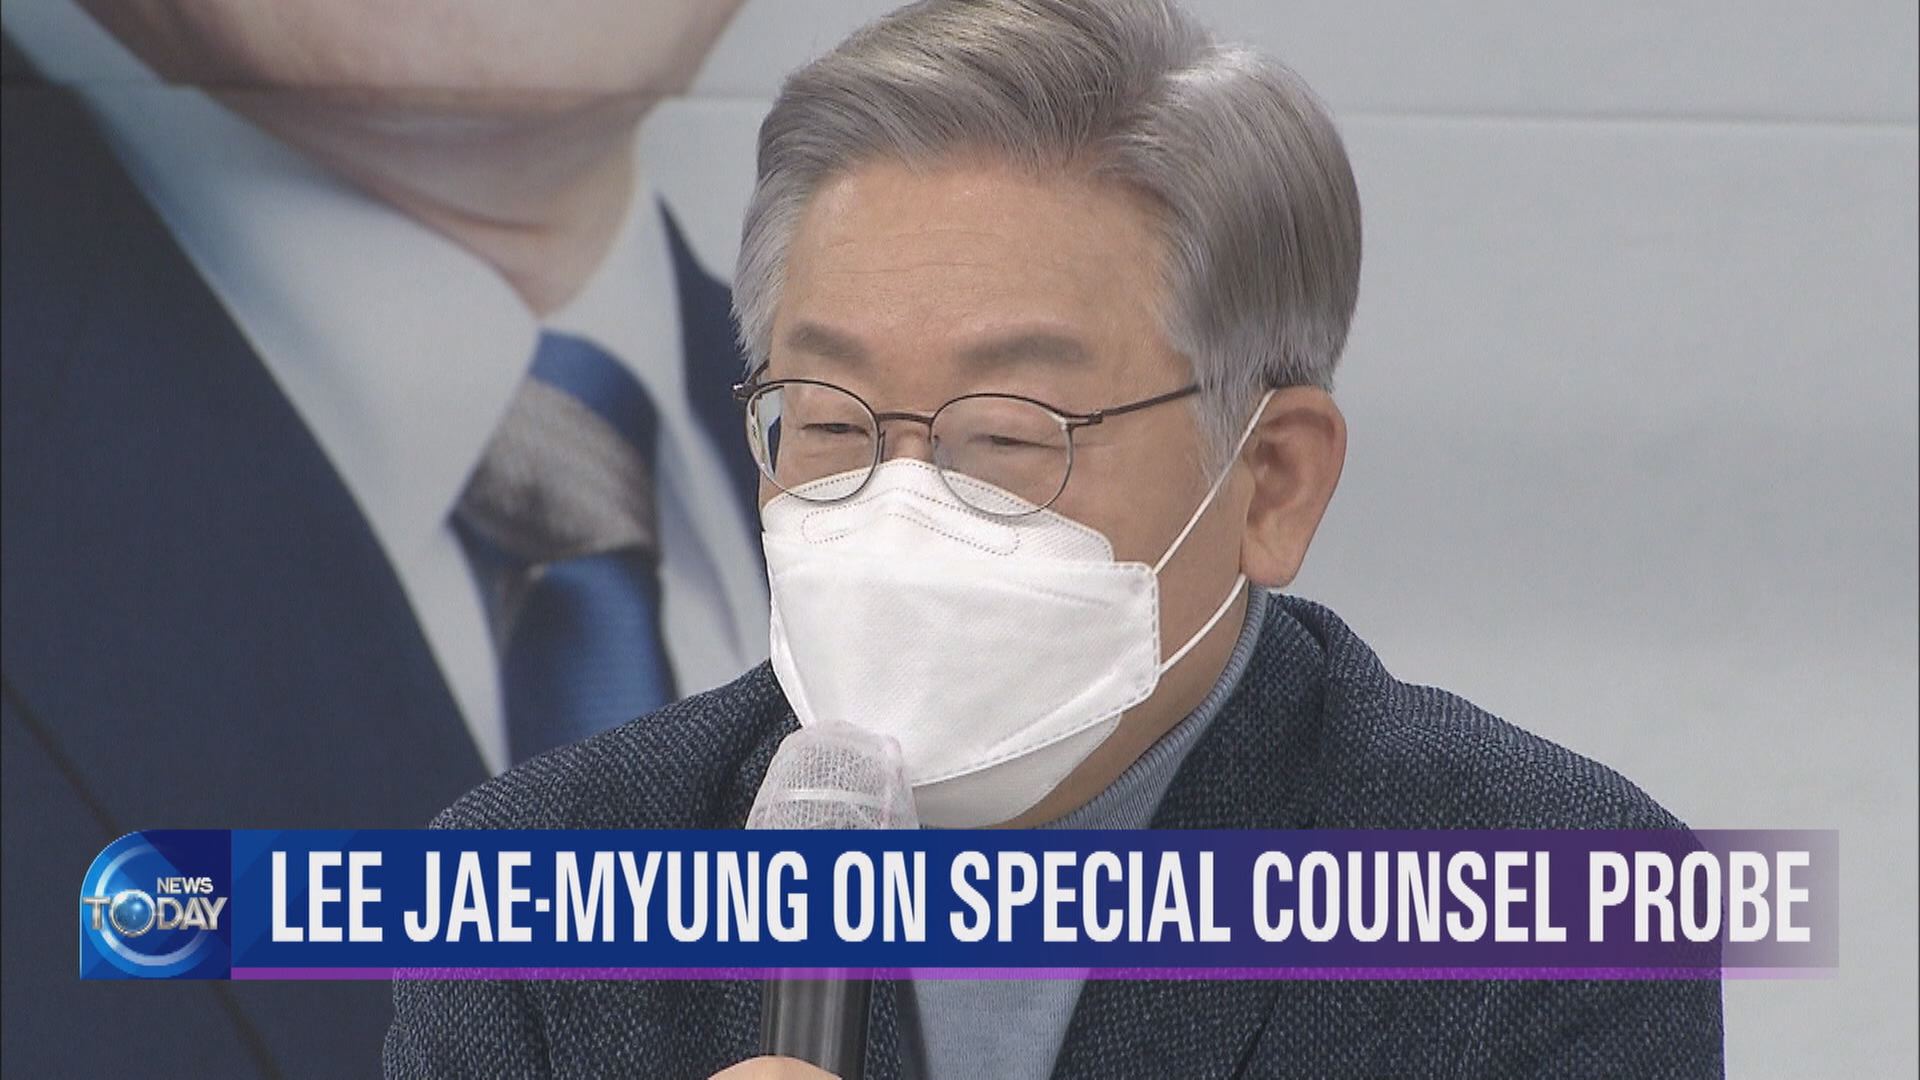 LEE JAE-MYUNG ON SPECIAL COUNSEL PROBE